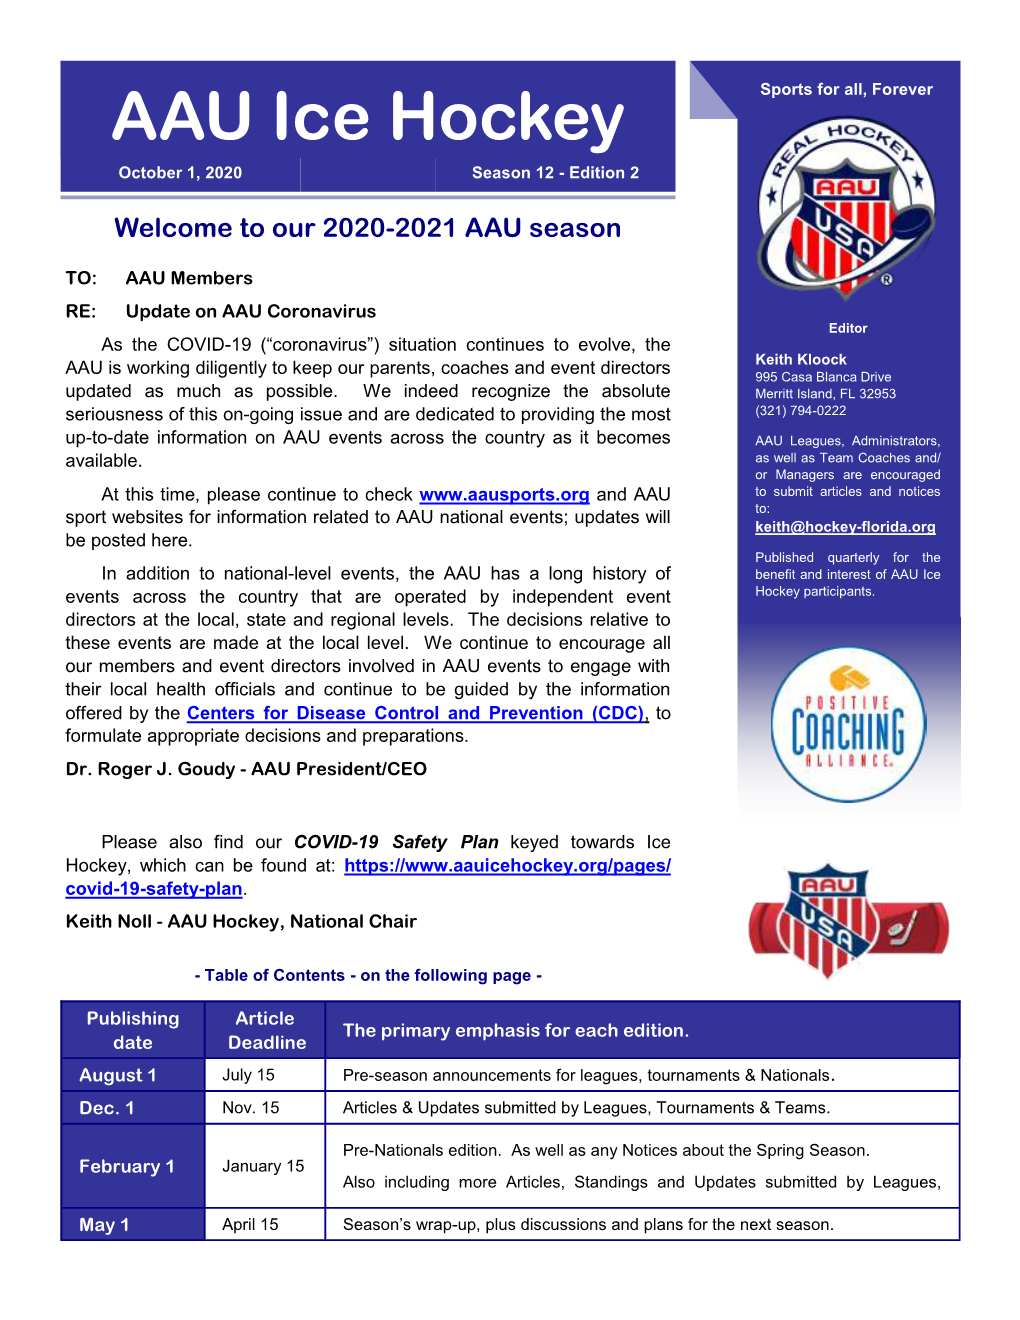 AAU Ice Hockey Sports for All, Forever October 1, 2020 Season 12 - Edition 2